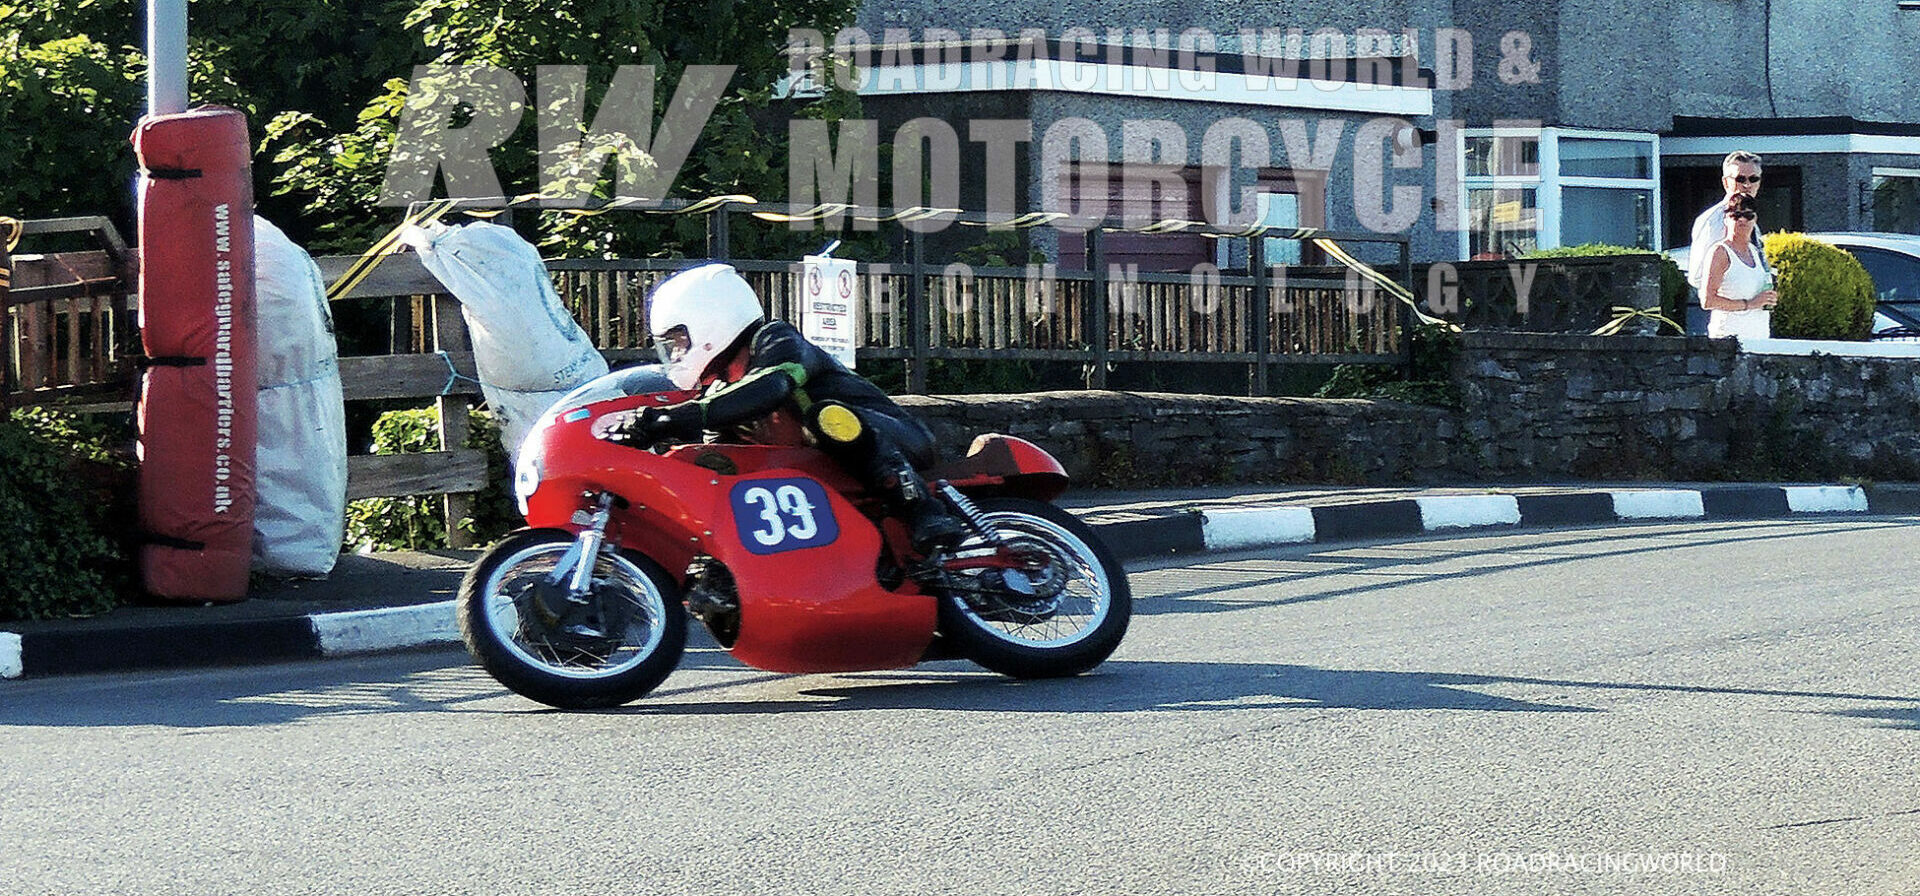 Typical real roads action shot, Brian Mateer at Castletown Corner on his 350cc Aermacchi. Spectators in their front garden are getting an up-close view, with haybales and foam padding on some of the immovable objects! Photos courtesy Mick Ofield.